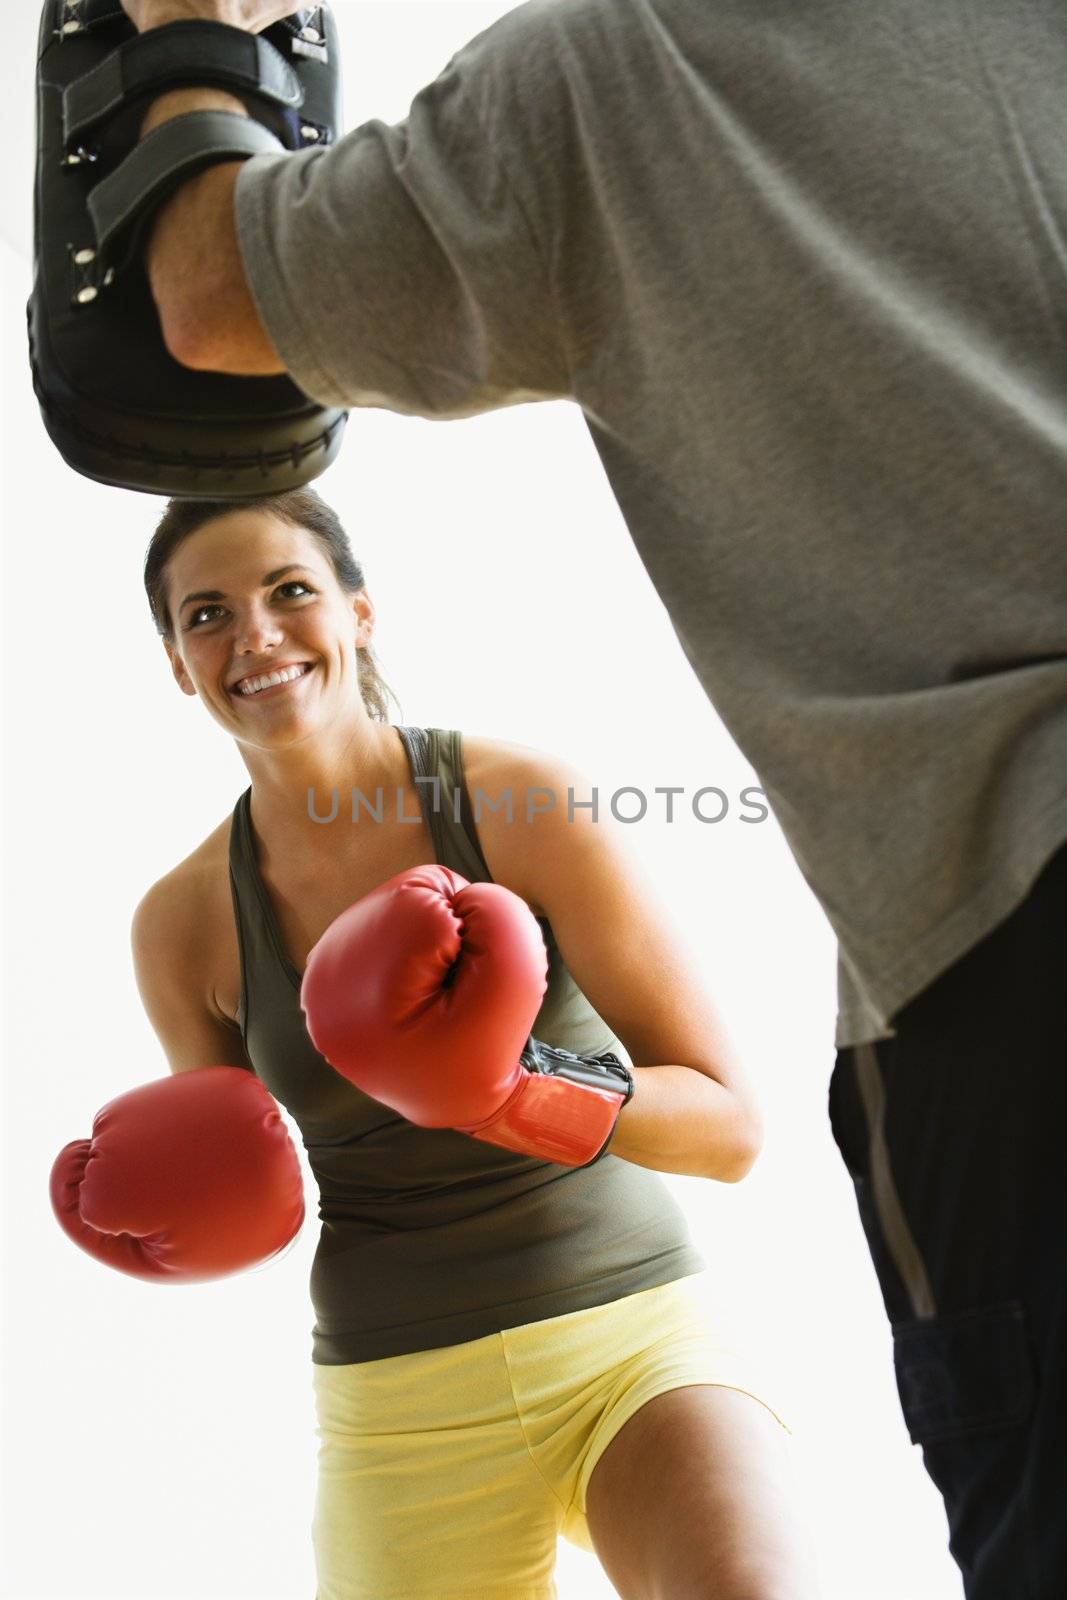 Woman wearing boxing gloves hitting training mits man is holding.